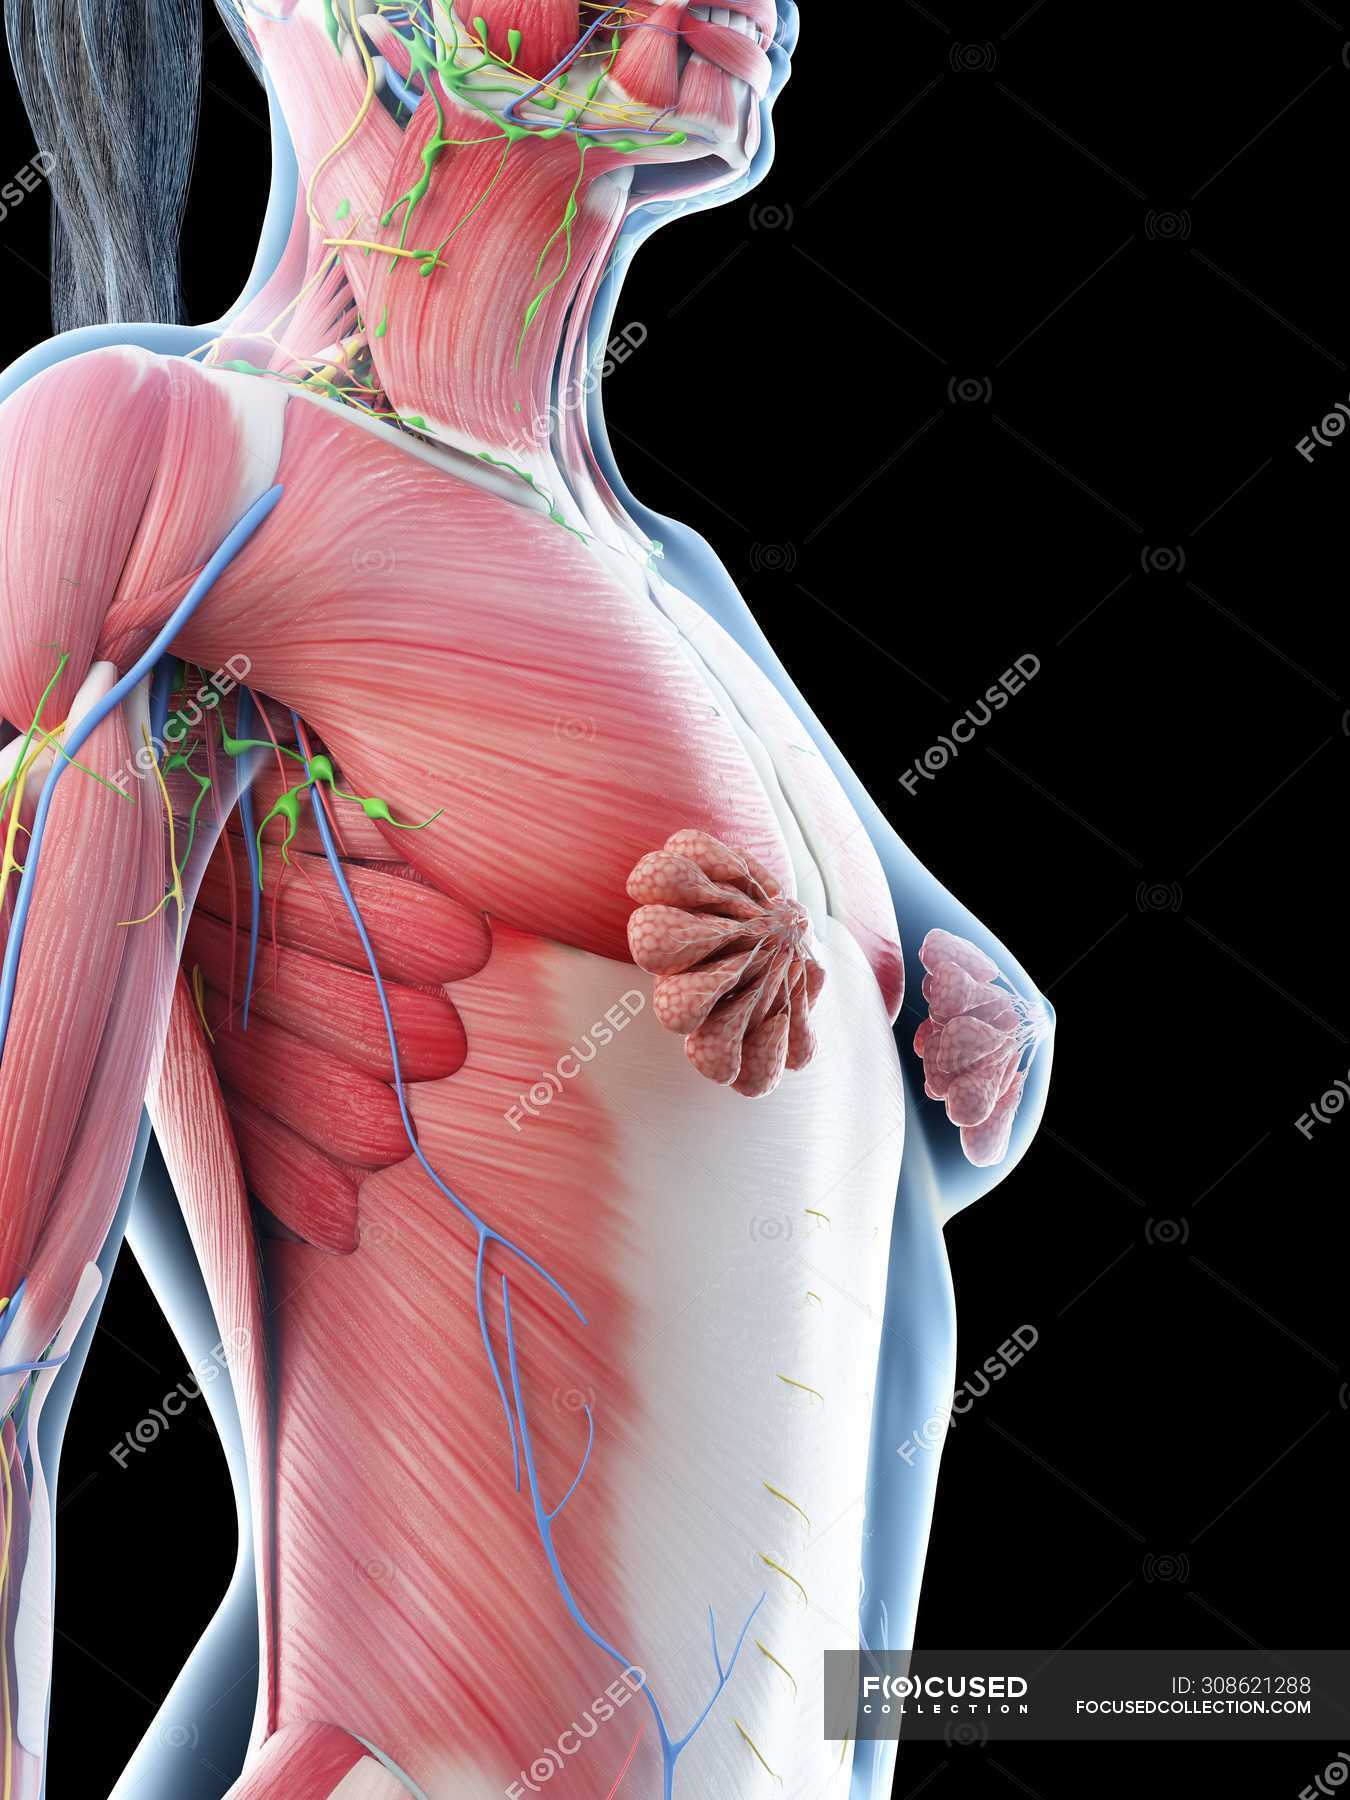 Female Upper Body Diagram - Muscles Of The Neck And Torso Classic Human